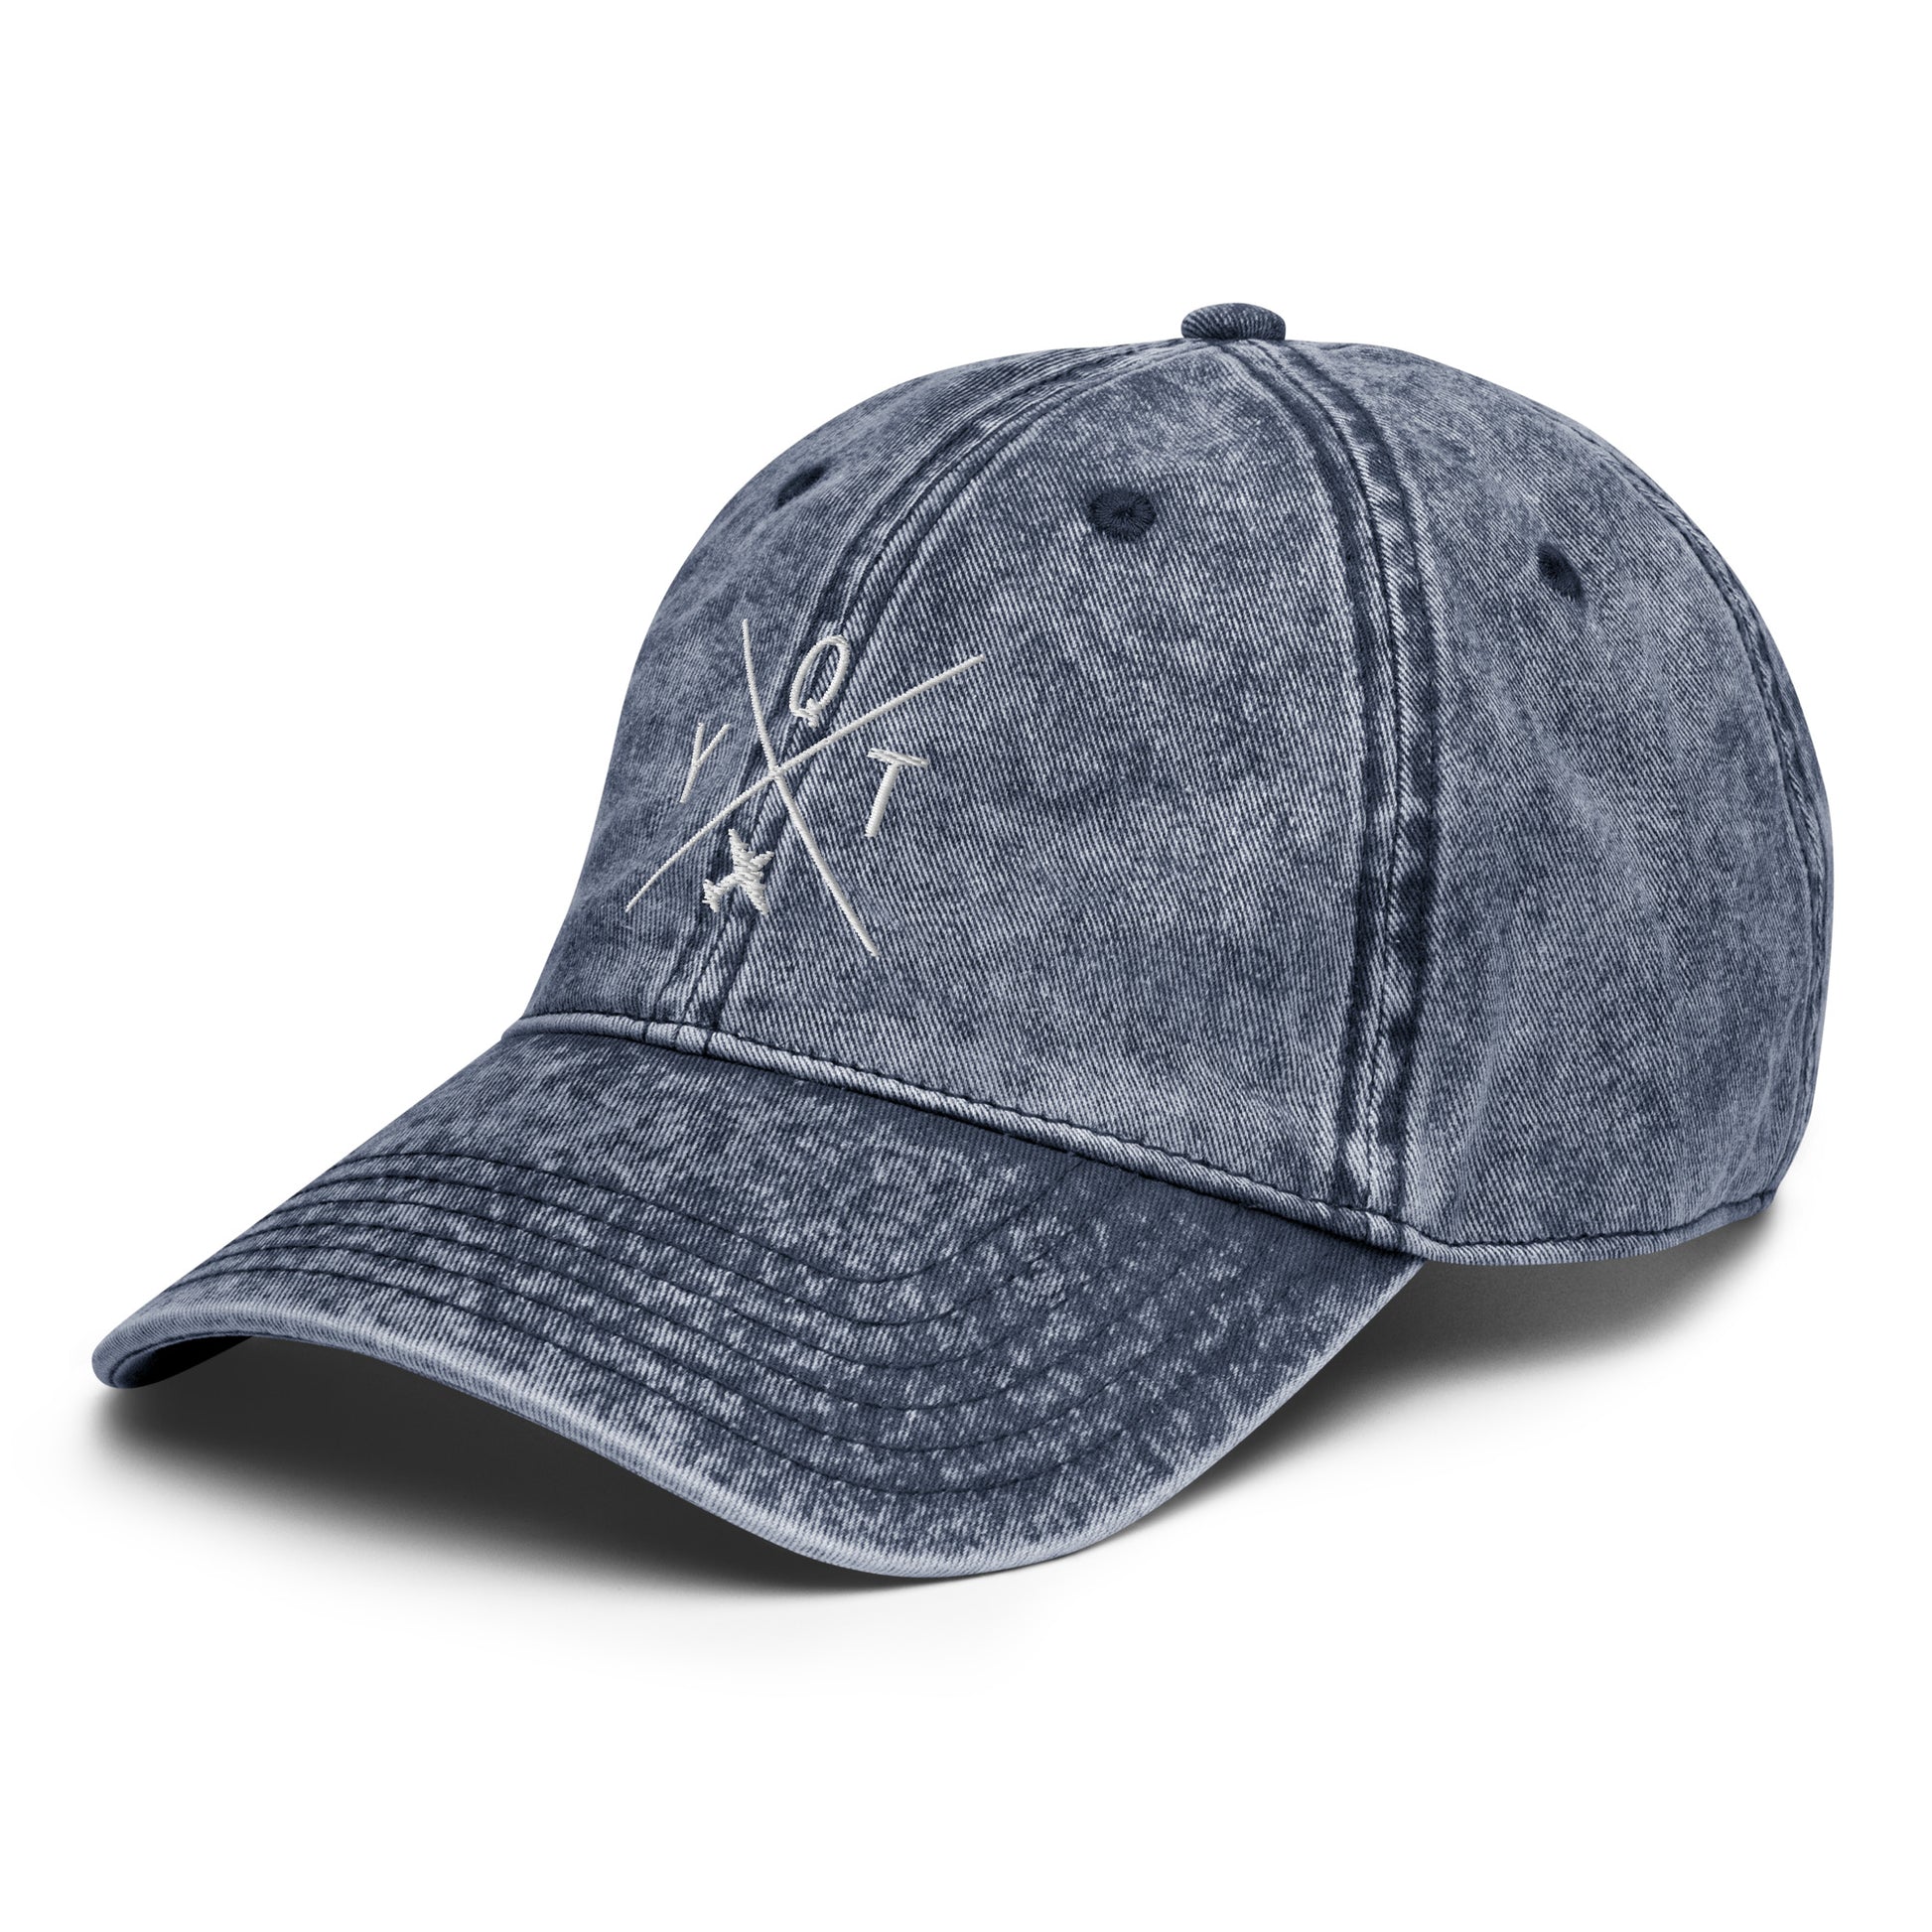 Crossed-X Cotton Twill Cap - White • YQT Thunder Bay • YHM Designs - Image 20